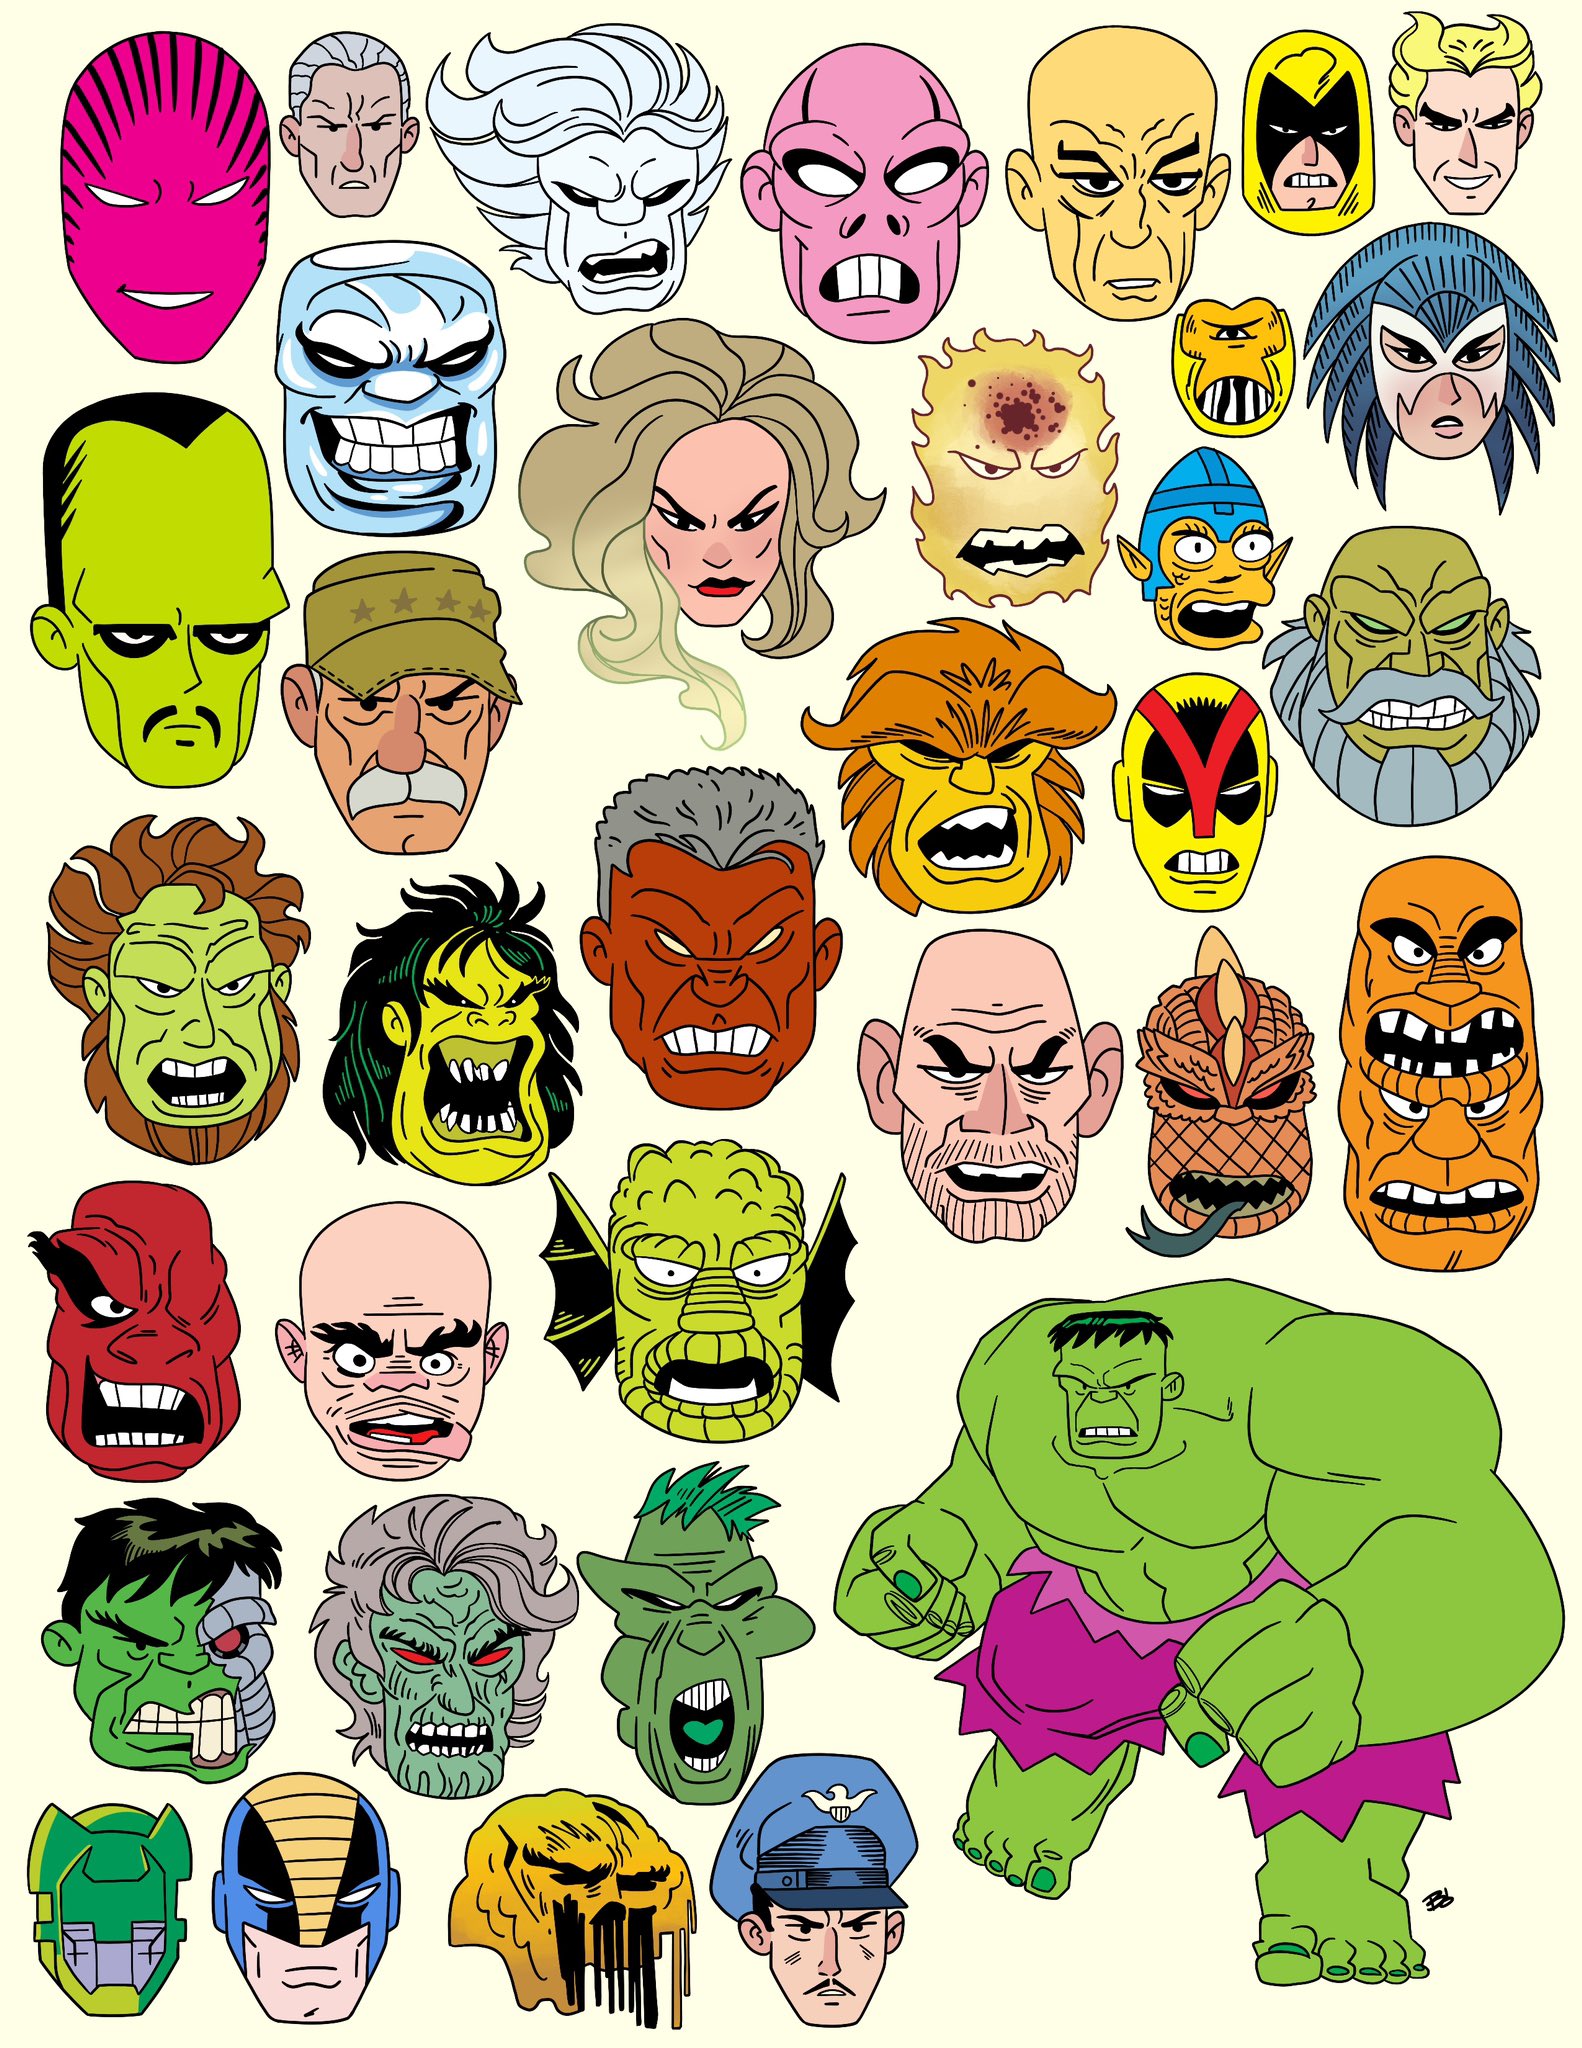 Dave Bardin On Twitter Hulk And His Rogues Marvel Comics Https T